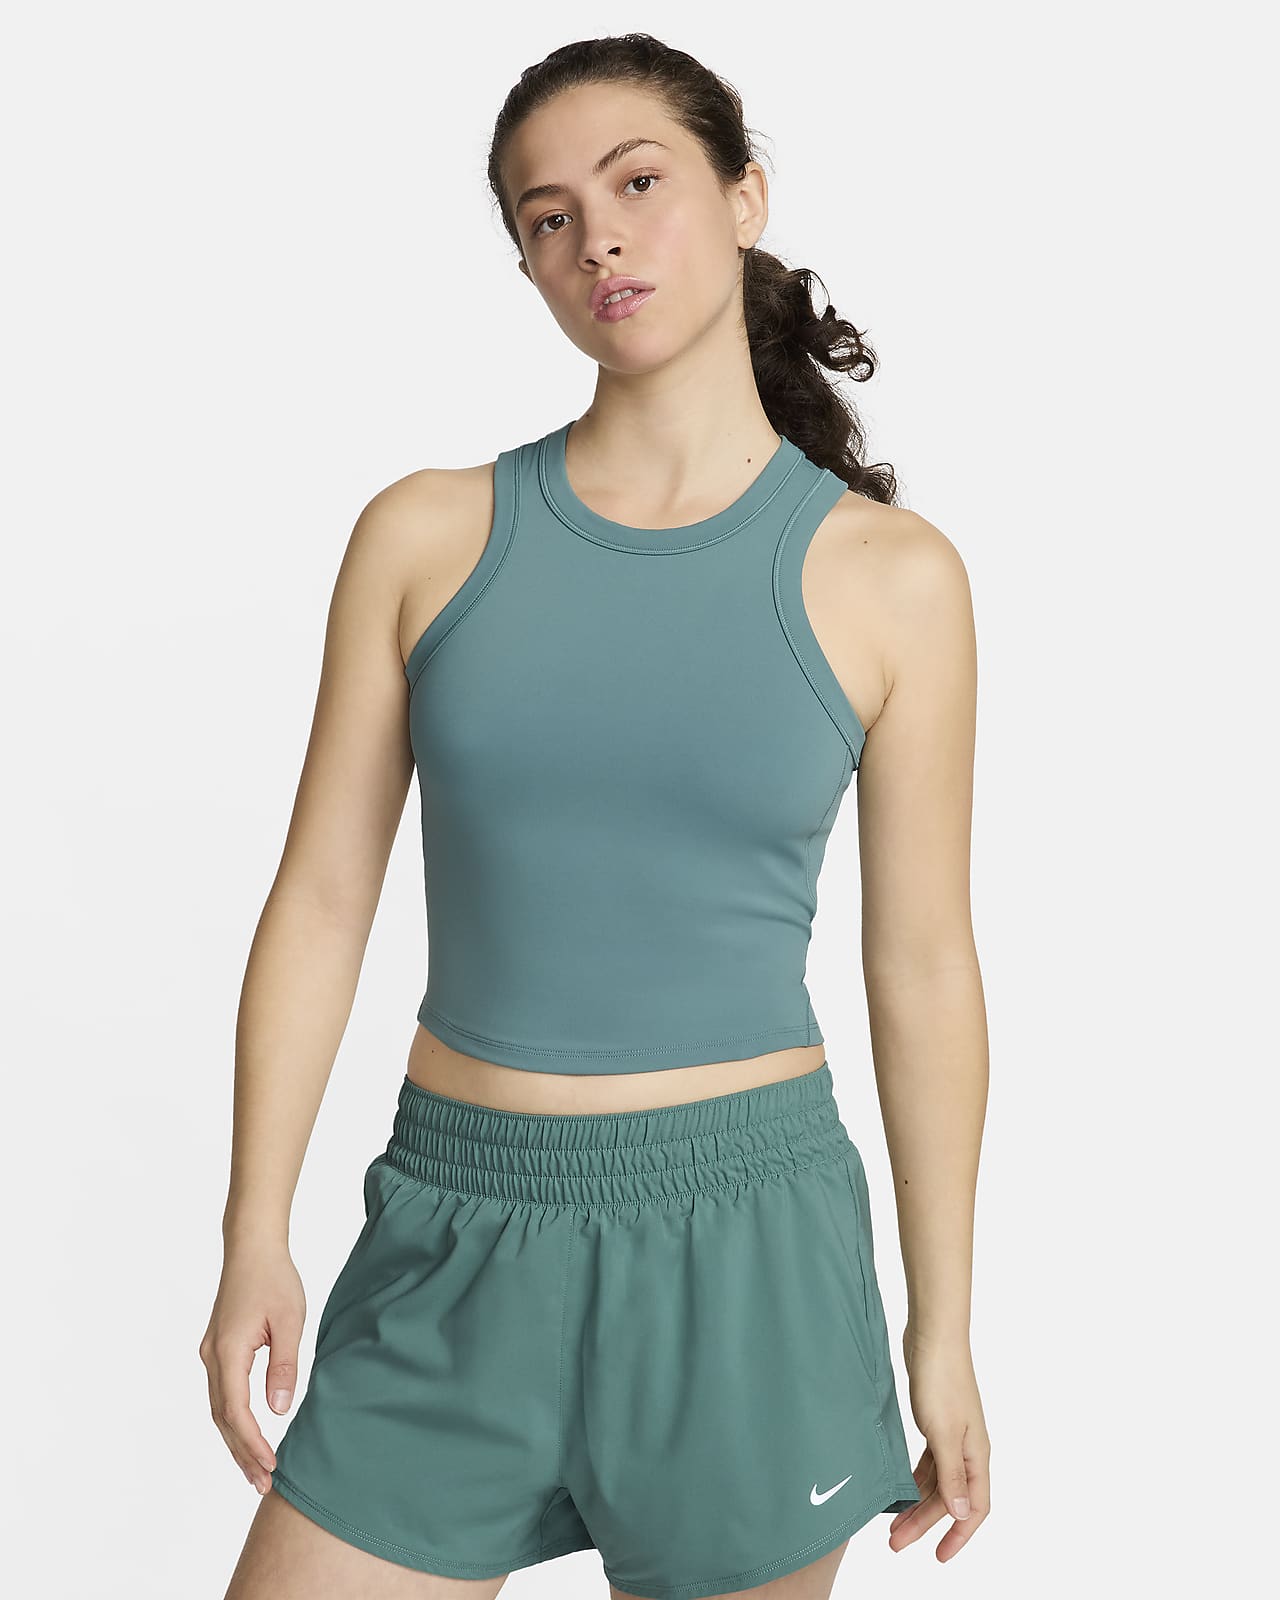 Nike One Fitted Women's Dri-FIT Cropped Tank Top. Nike CH